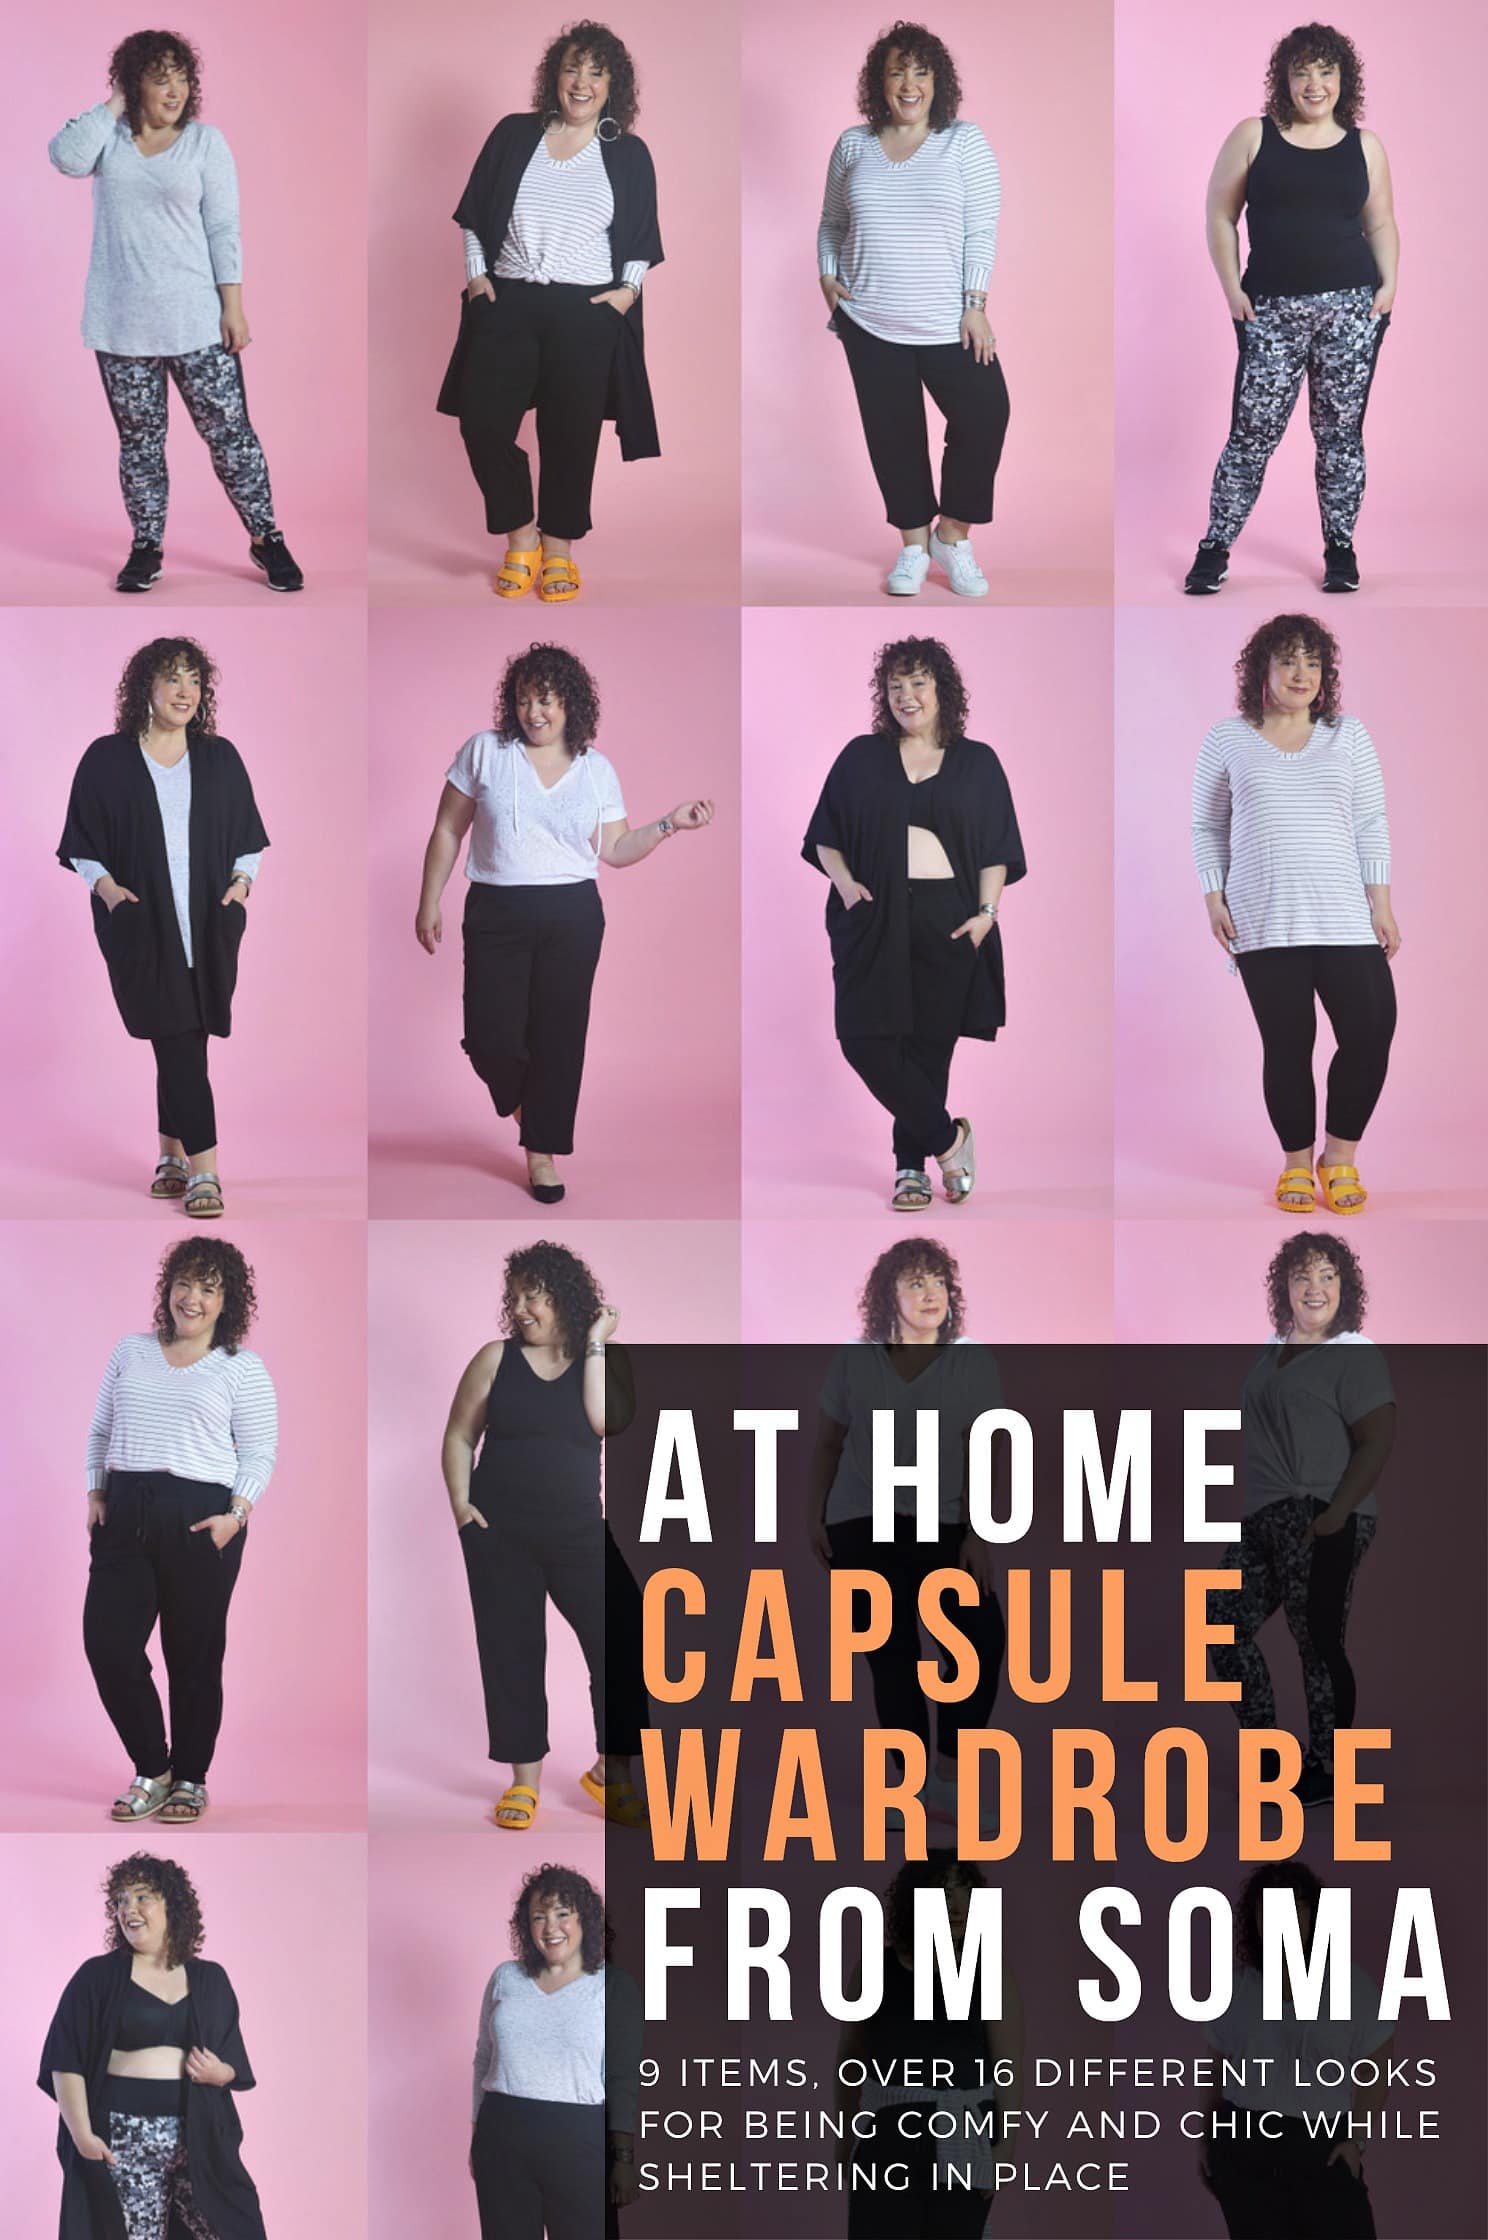 Stay At Home Capsule Wardrobe from Soma